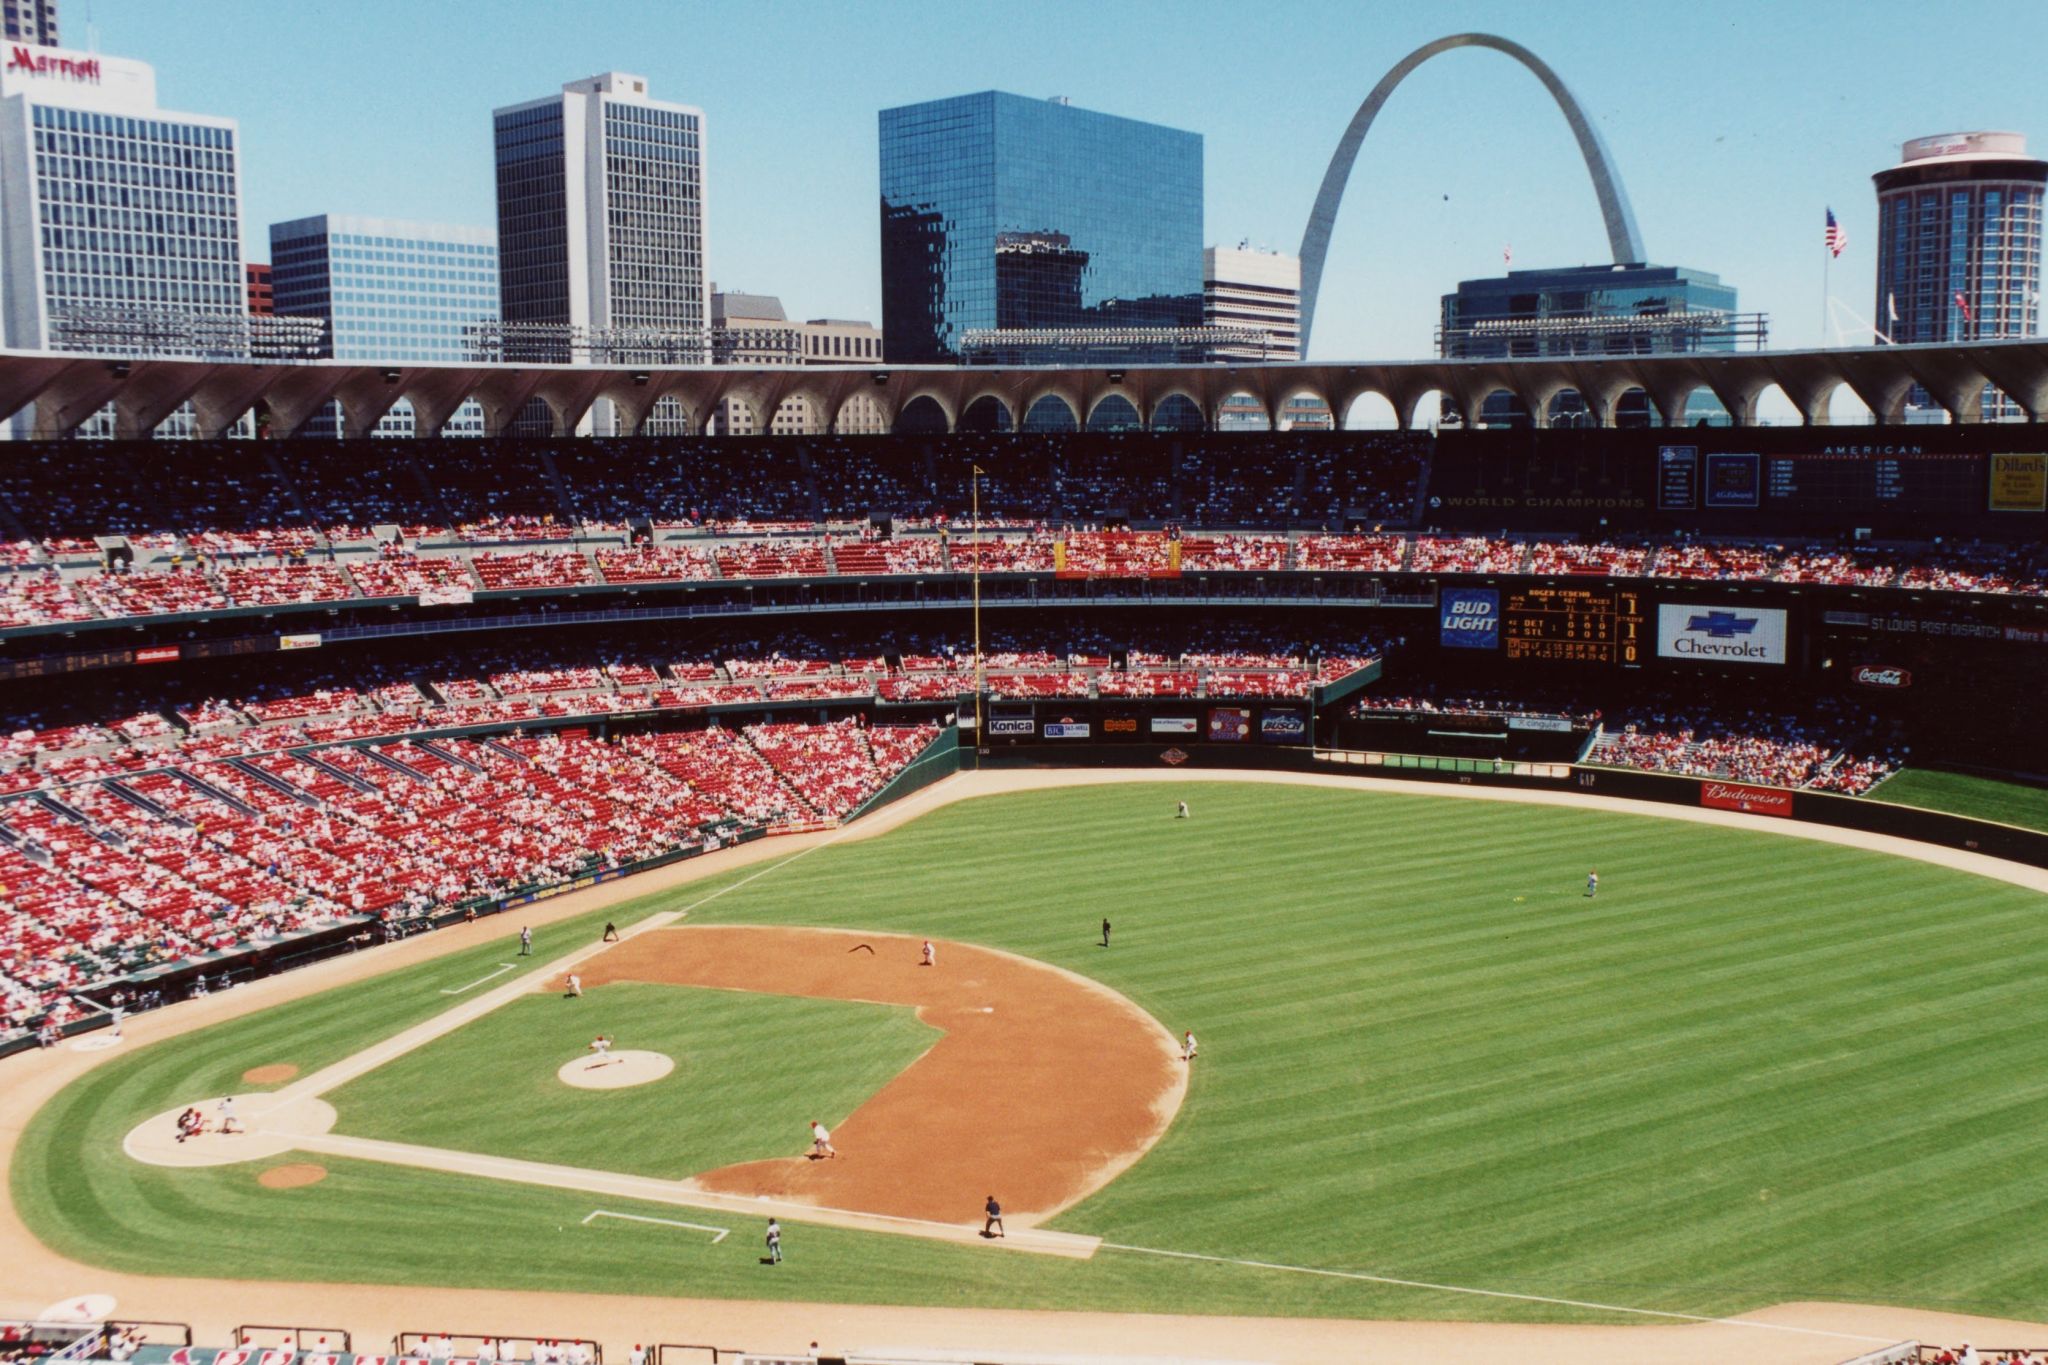 Golf is coming back to Busch Stadium